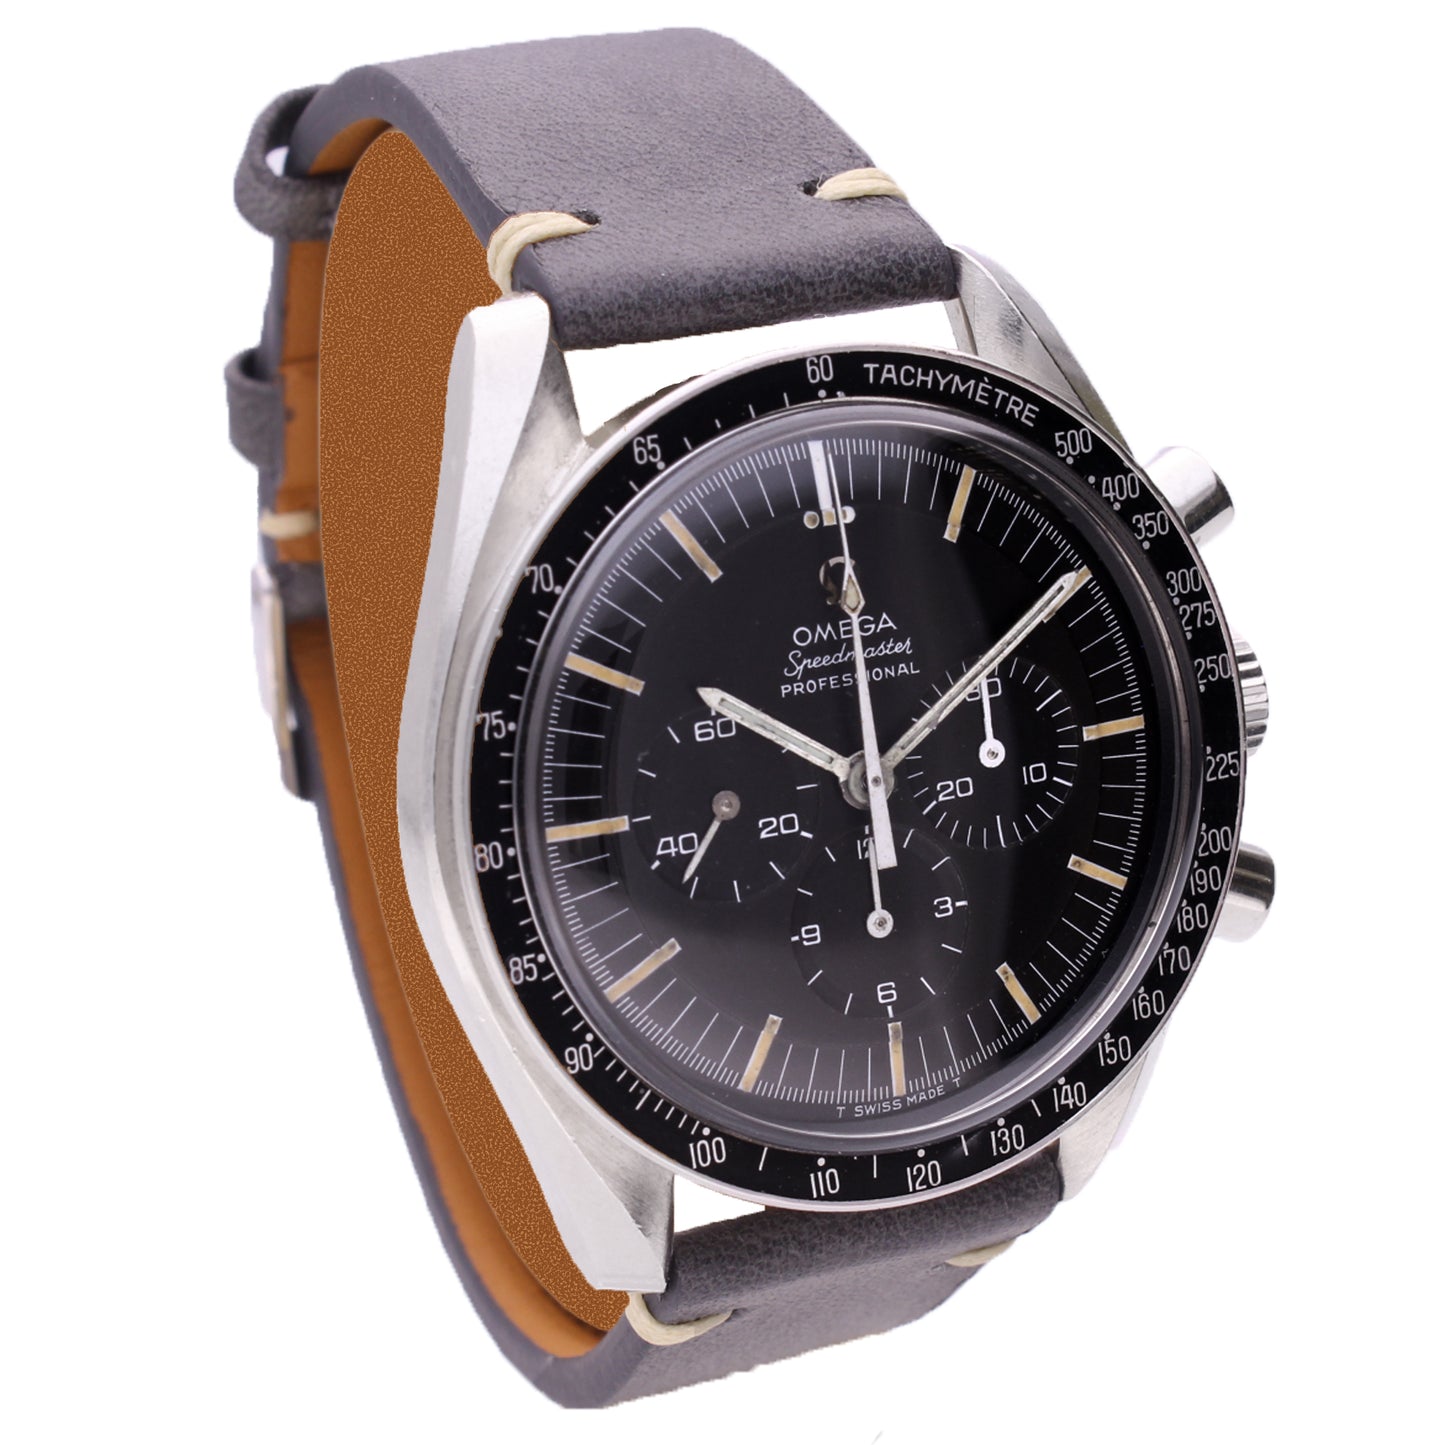 Stainless steel OMEGA Speedmaster 'transitional' Professional chronograph wristwatch. Made 1969